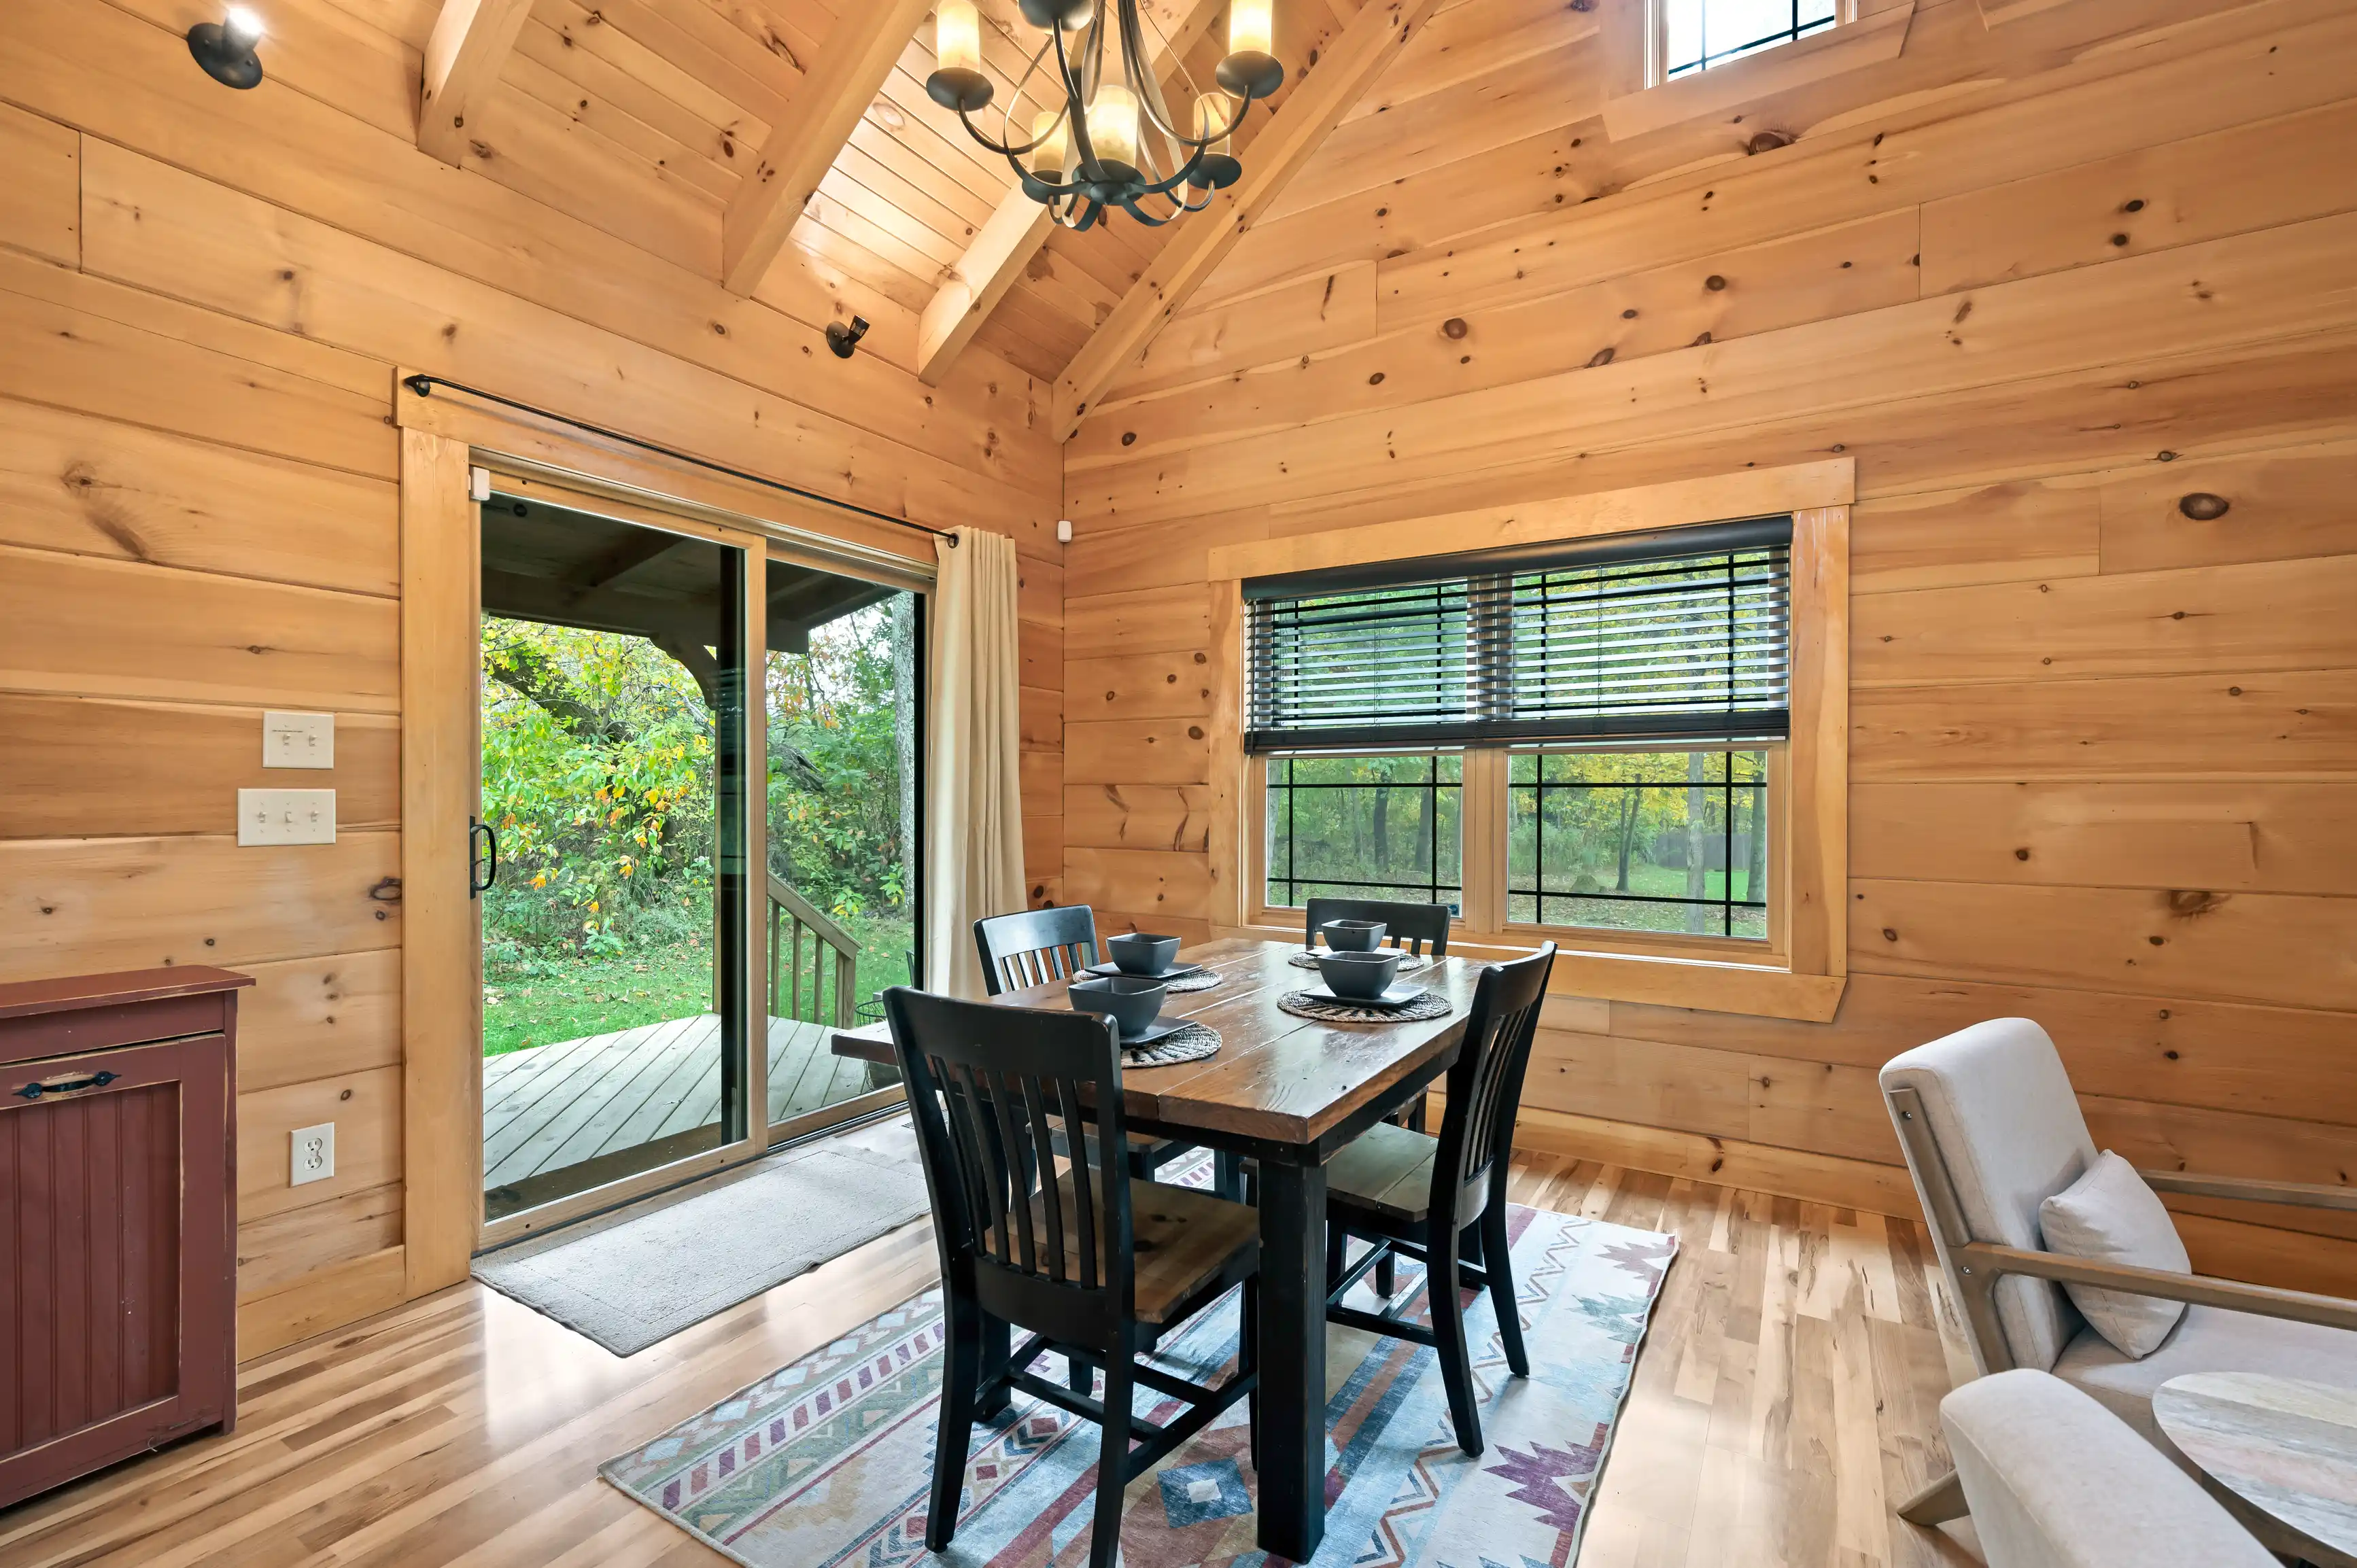 Cozy wooden cabin interior with a dining table set, open patio door, and natural light.